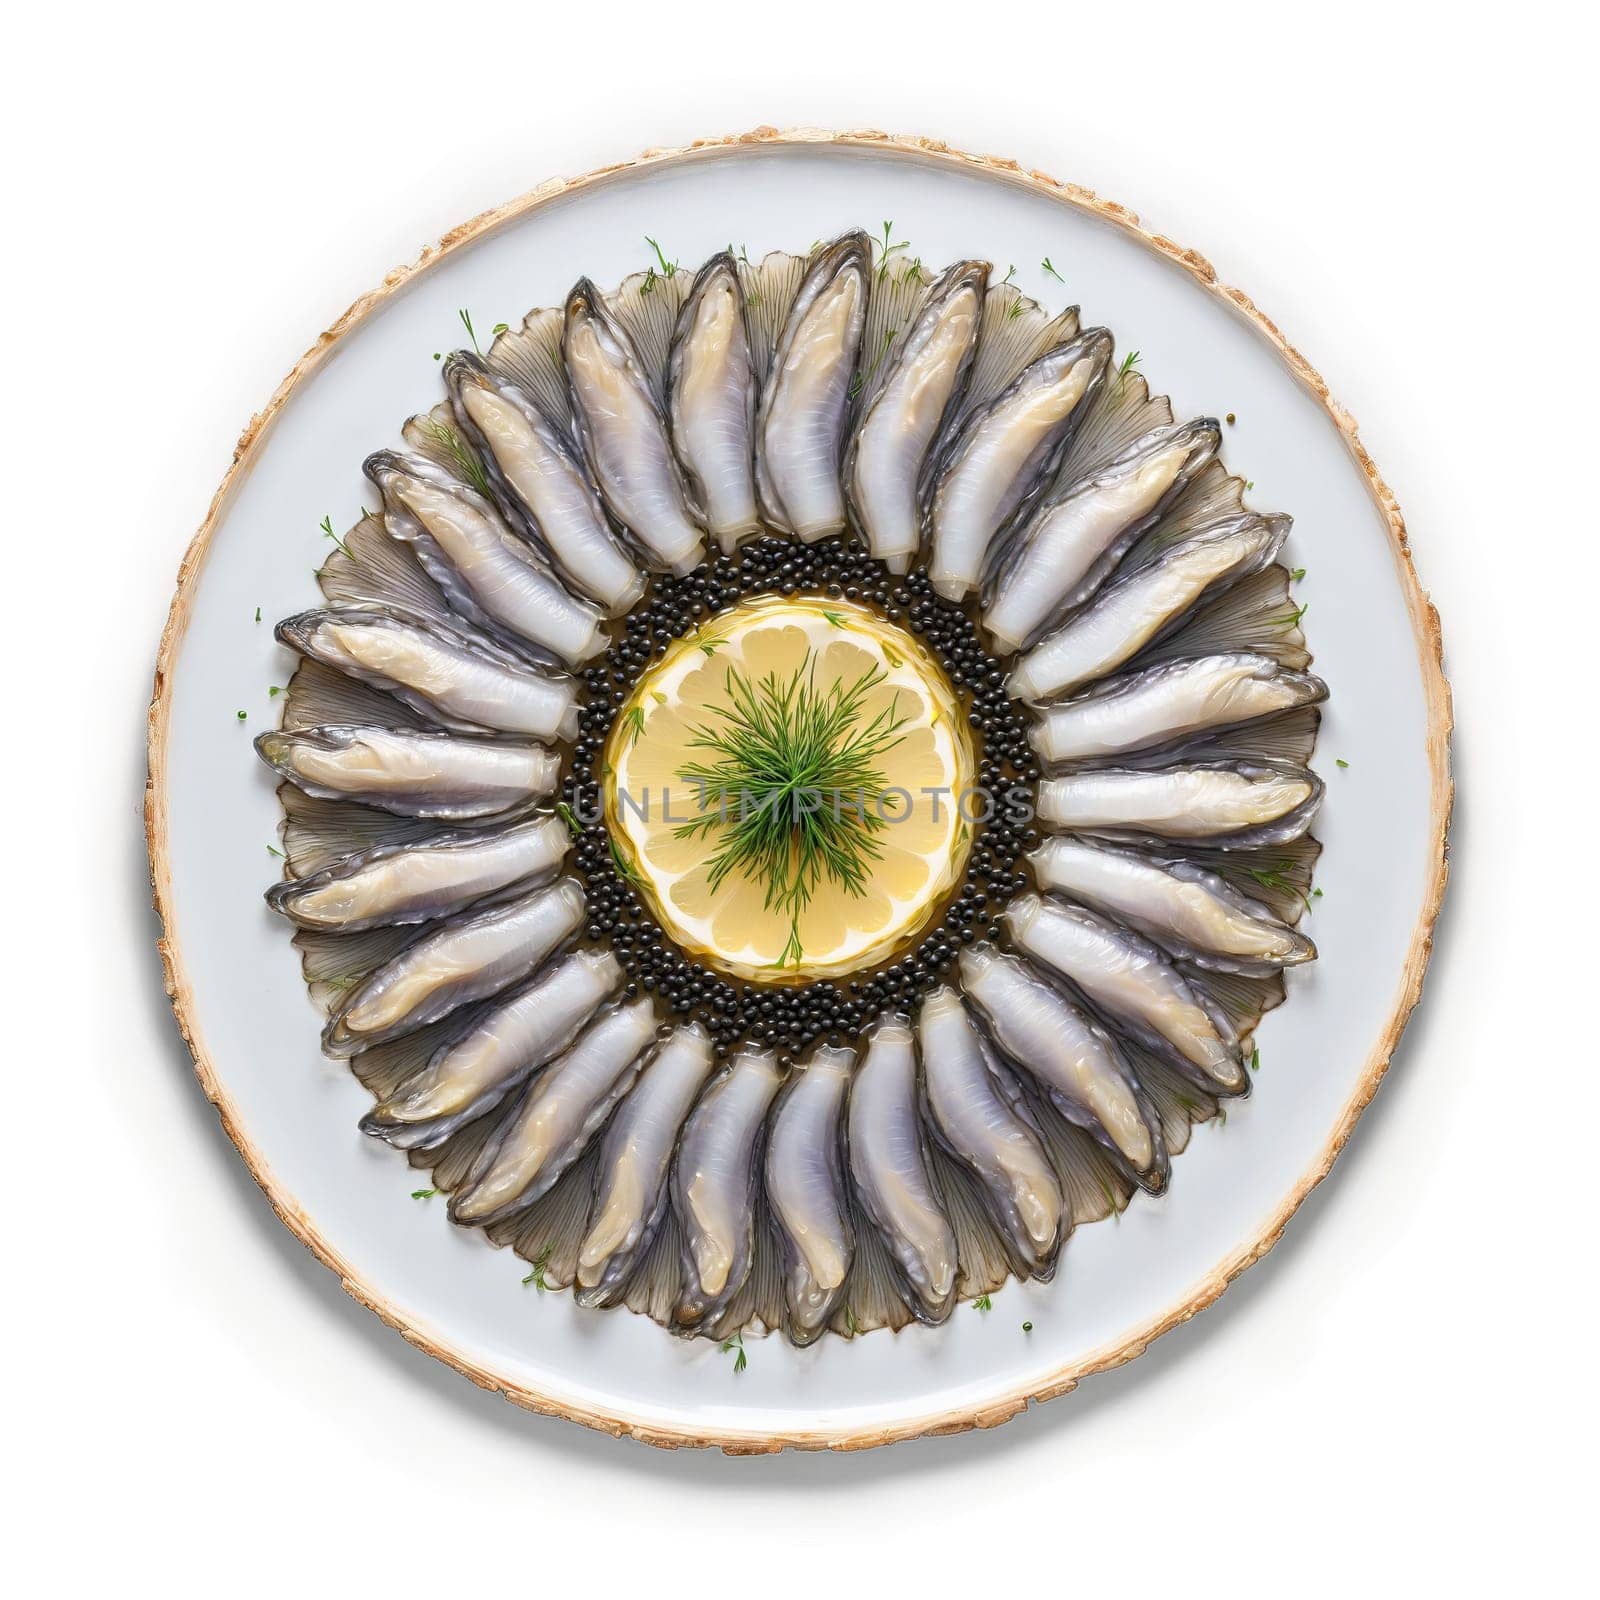 Dressed Herring Mandala tender herring fillets with onions and oil layered in a symmetrical radial by panophotograph